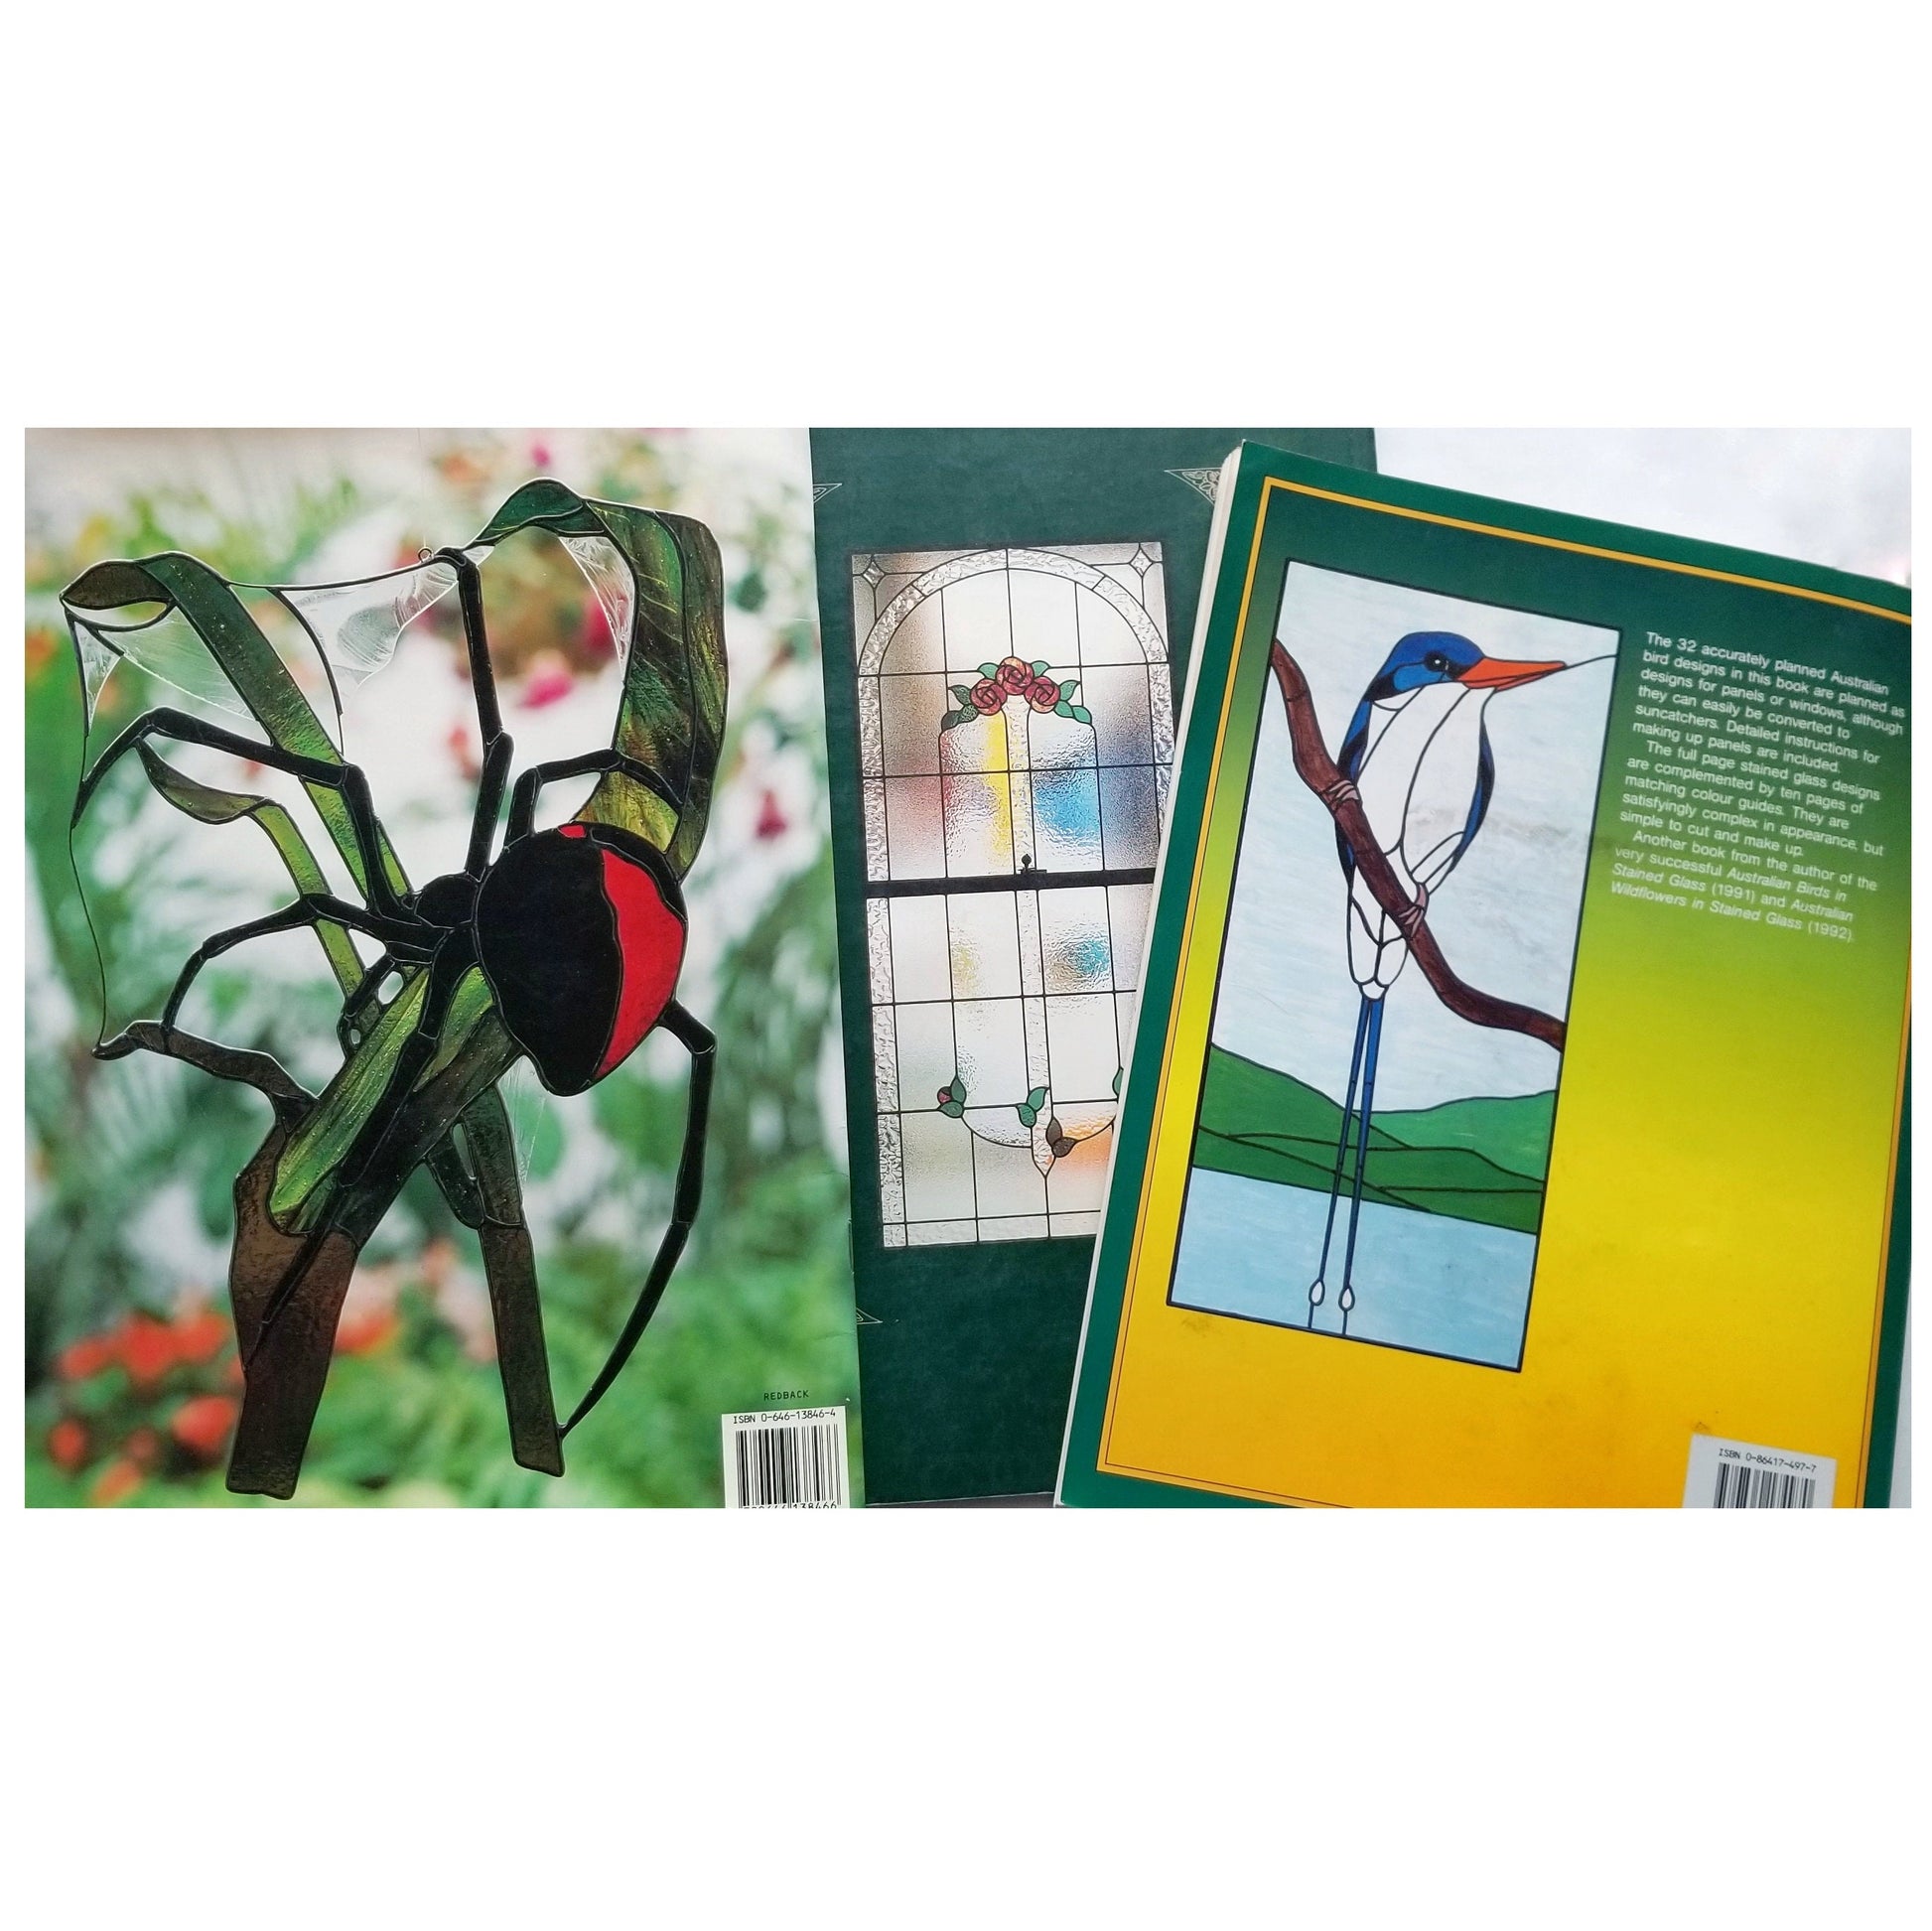 Stained Glass Patterns, 3 Books. Panel Techniques & Instruction. Used, Vintage, Fair Condition. Australian Wildlife Suncatchers.